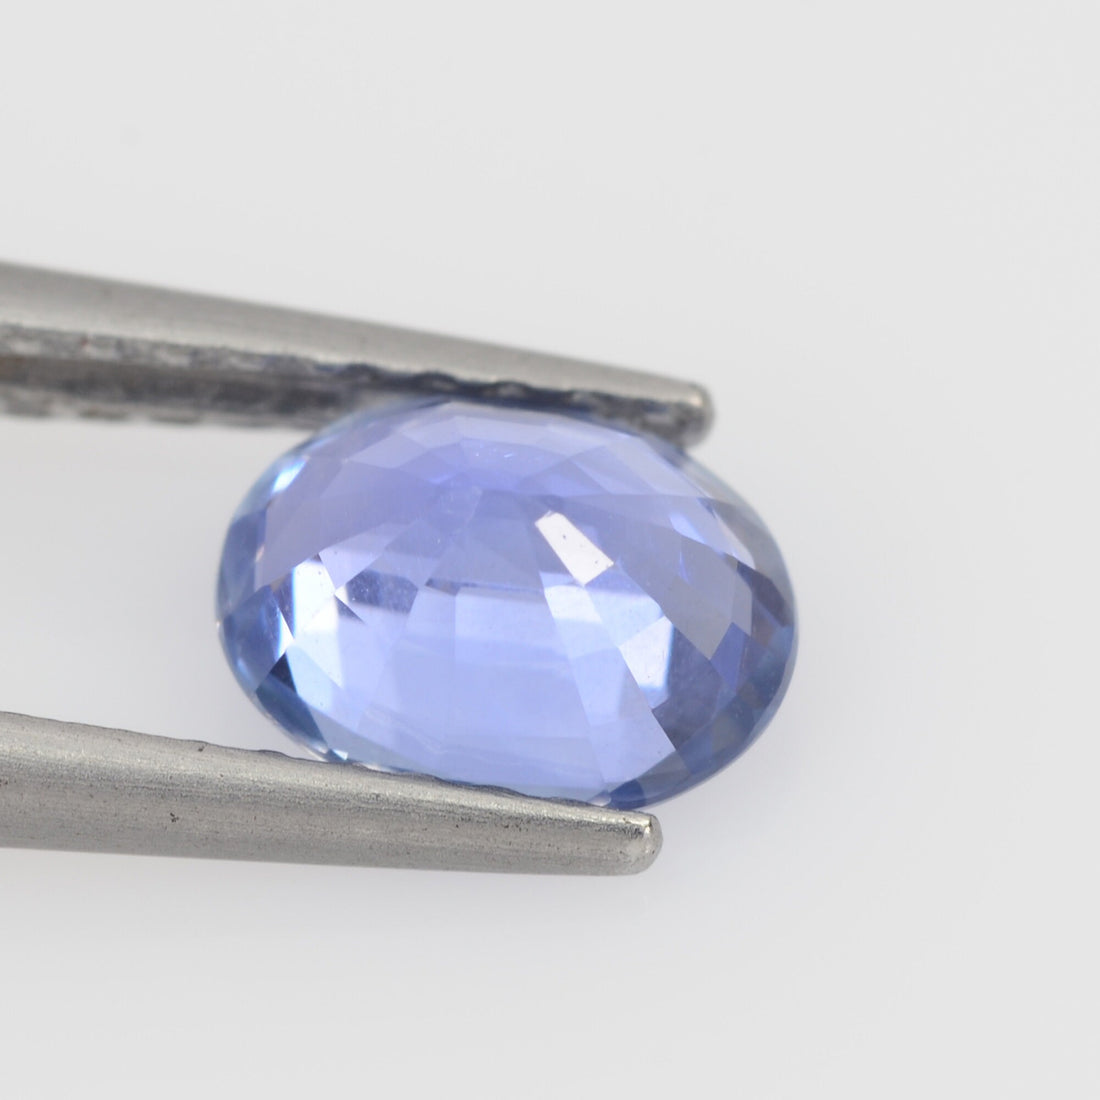 0.96 cts Natural Blue Sapphire Loose Gemstone Oval Cut